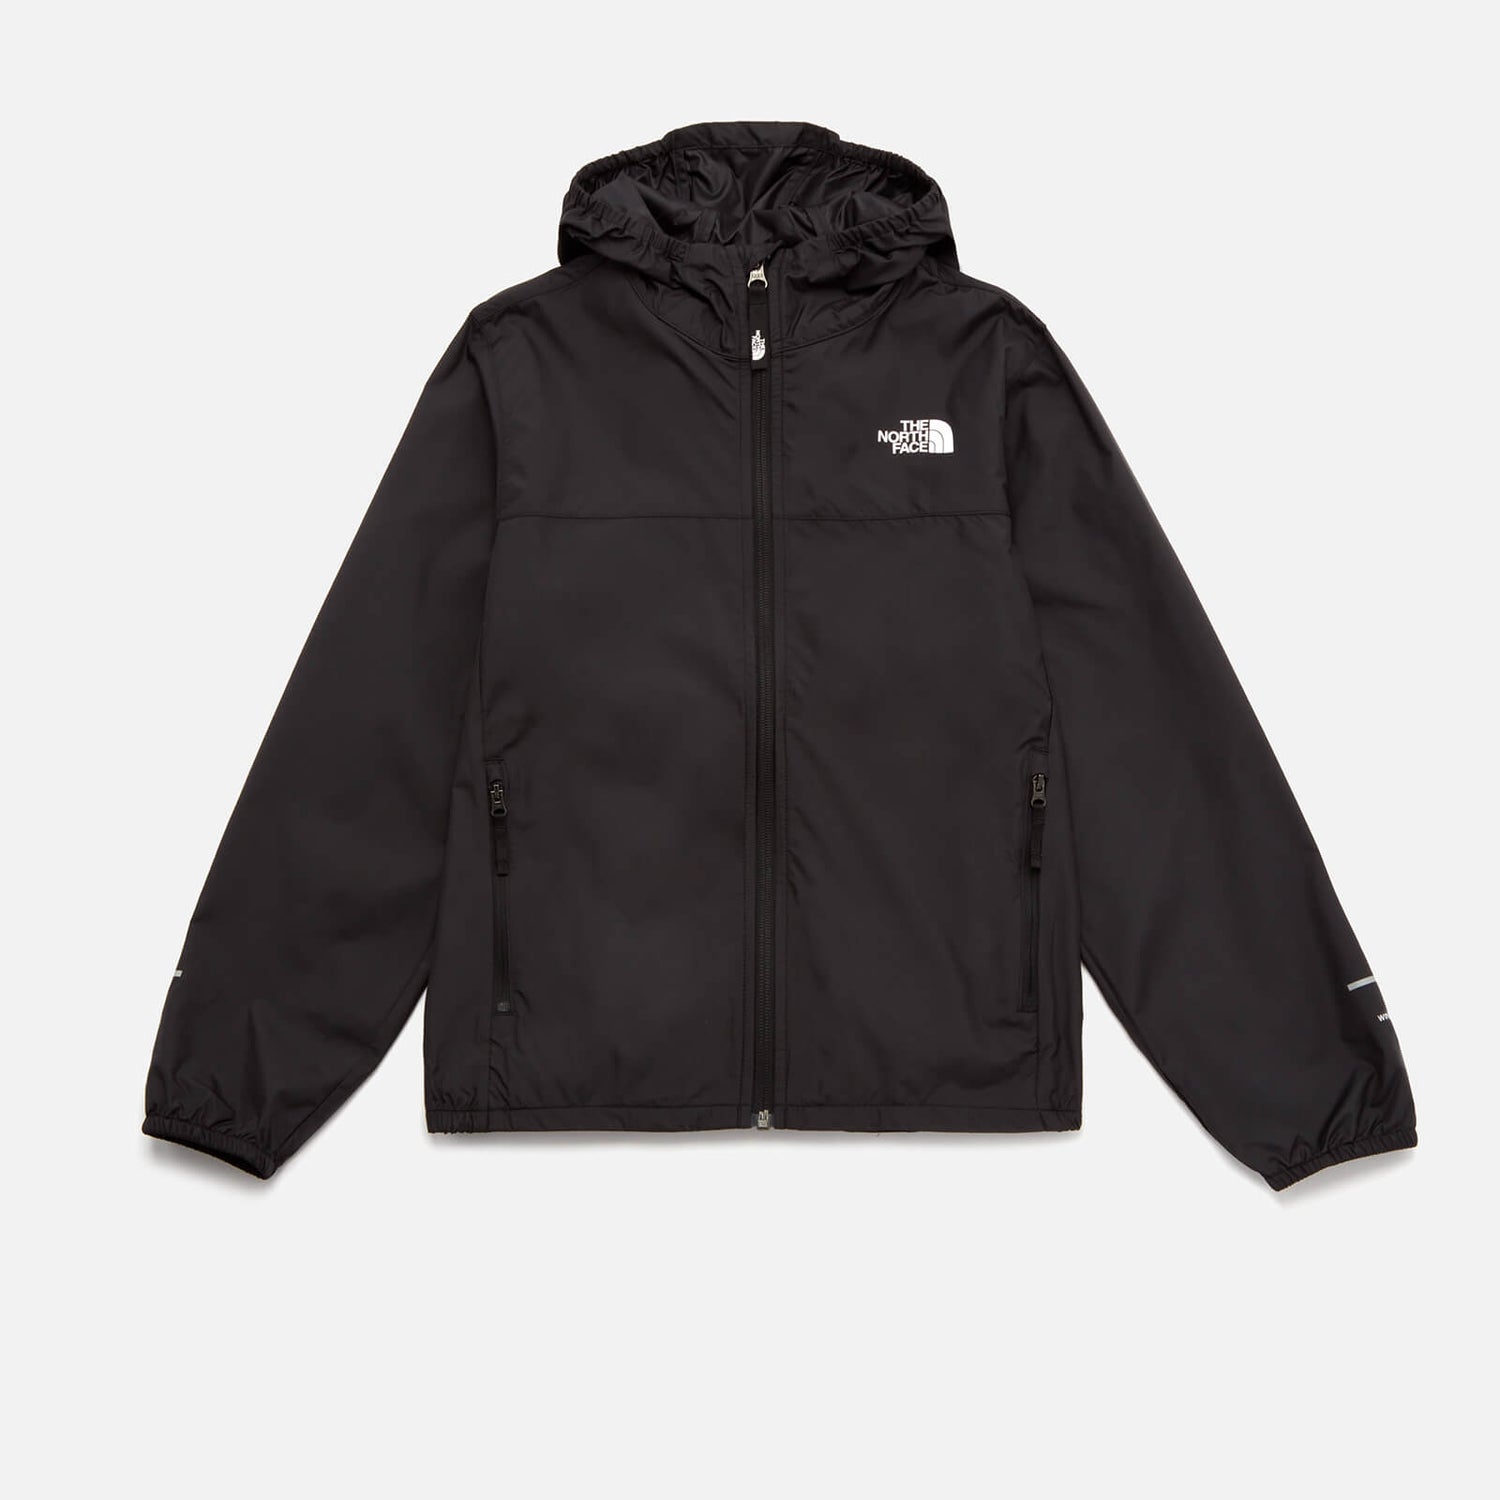 The North Face Boys' Reactor Wind Jacket - Black - 5-6 Years